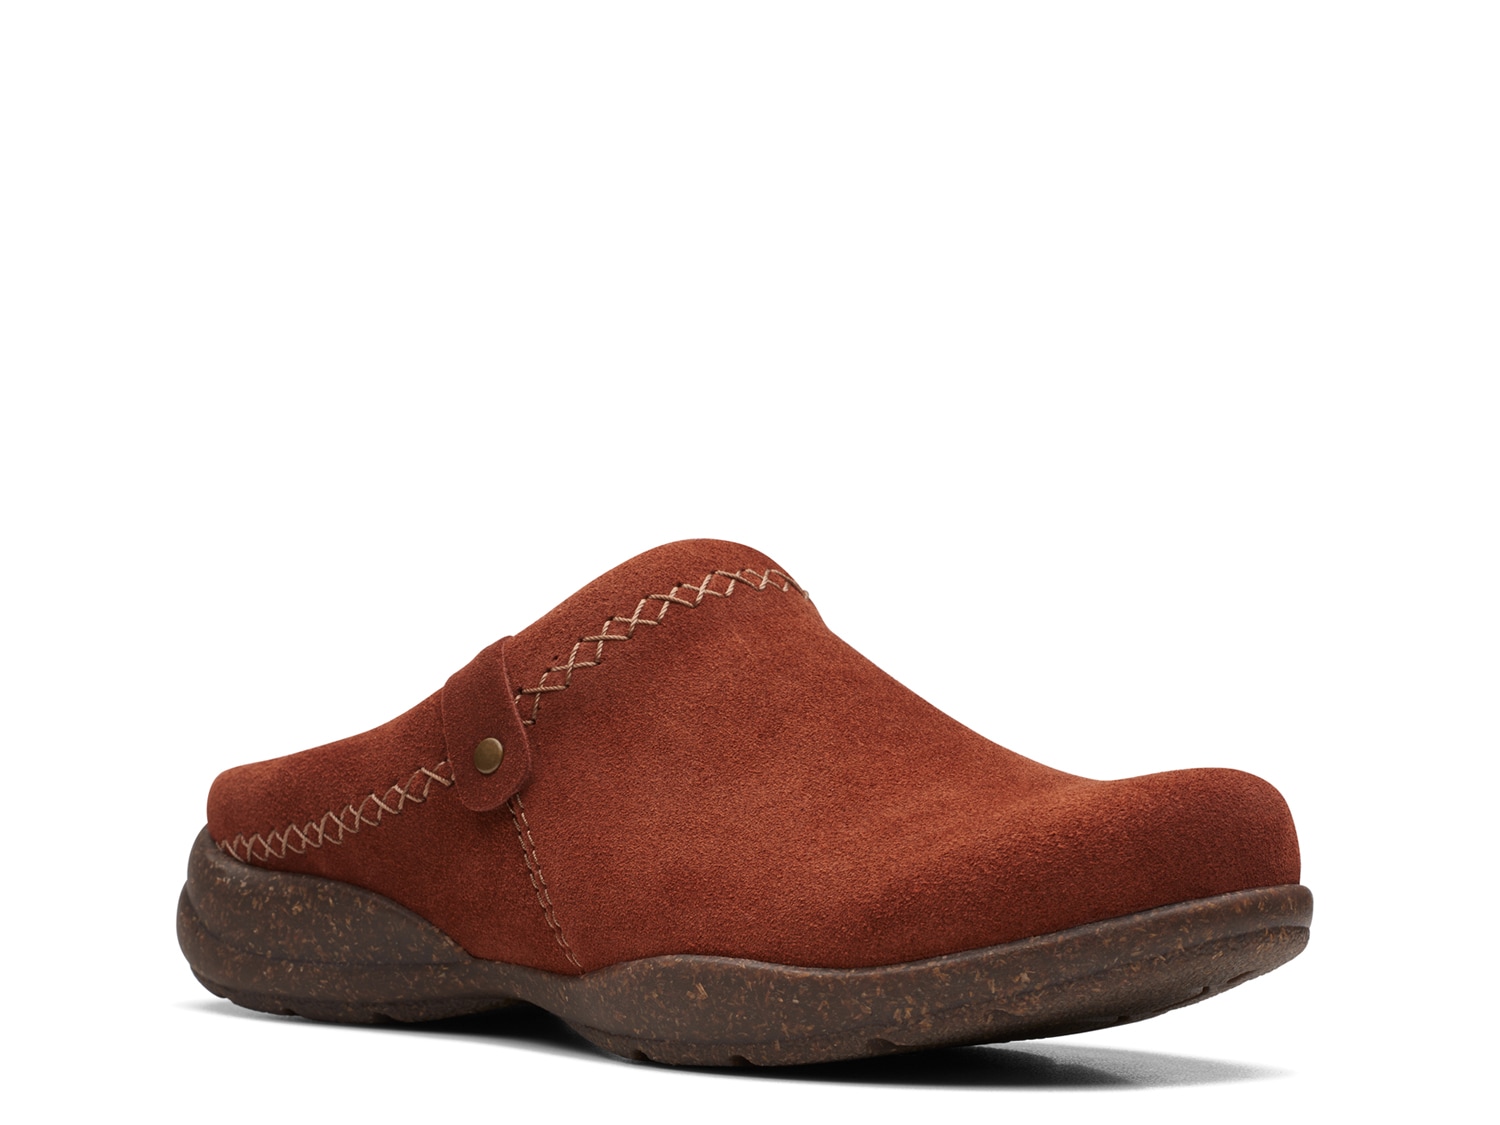 Сабо Roseville Echo Clarks, красное дерево сабо clarks roseville echo цвет mahogany suede